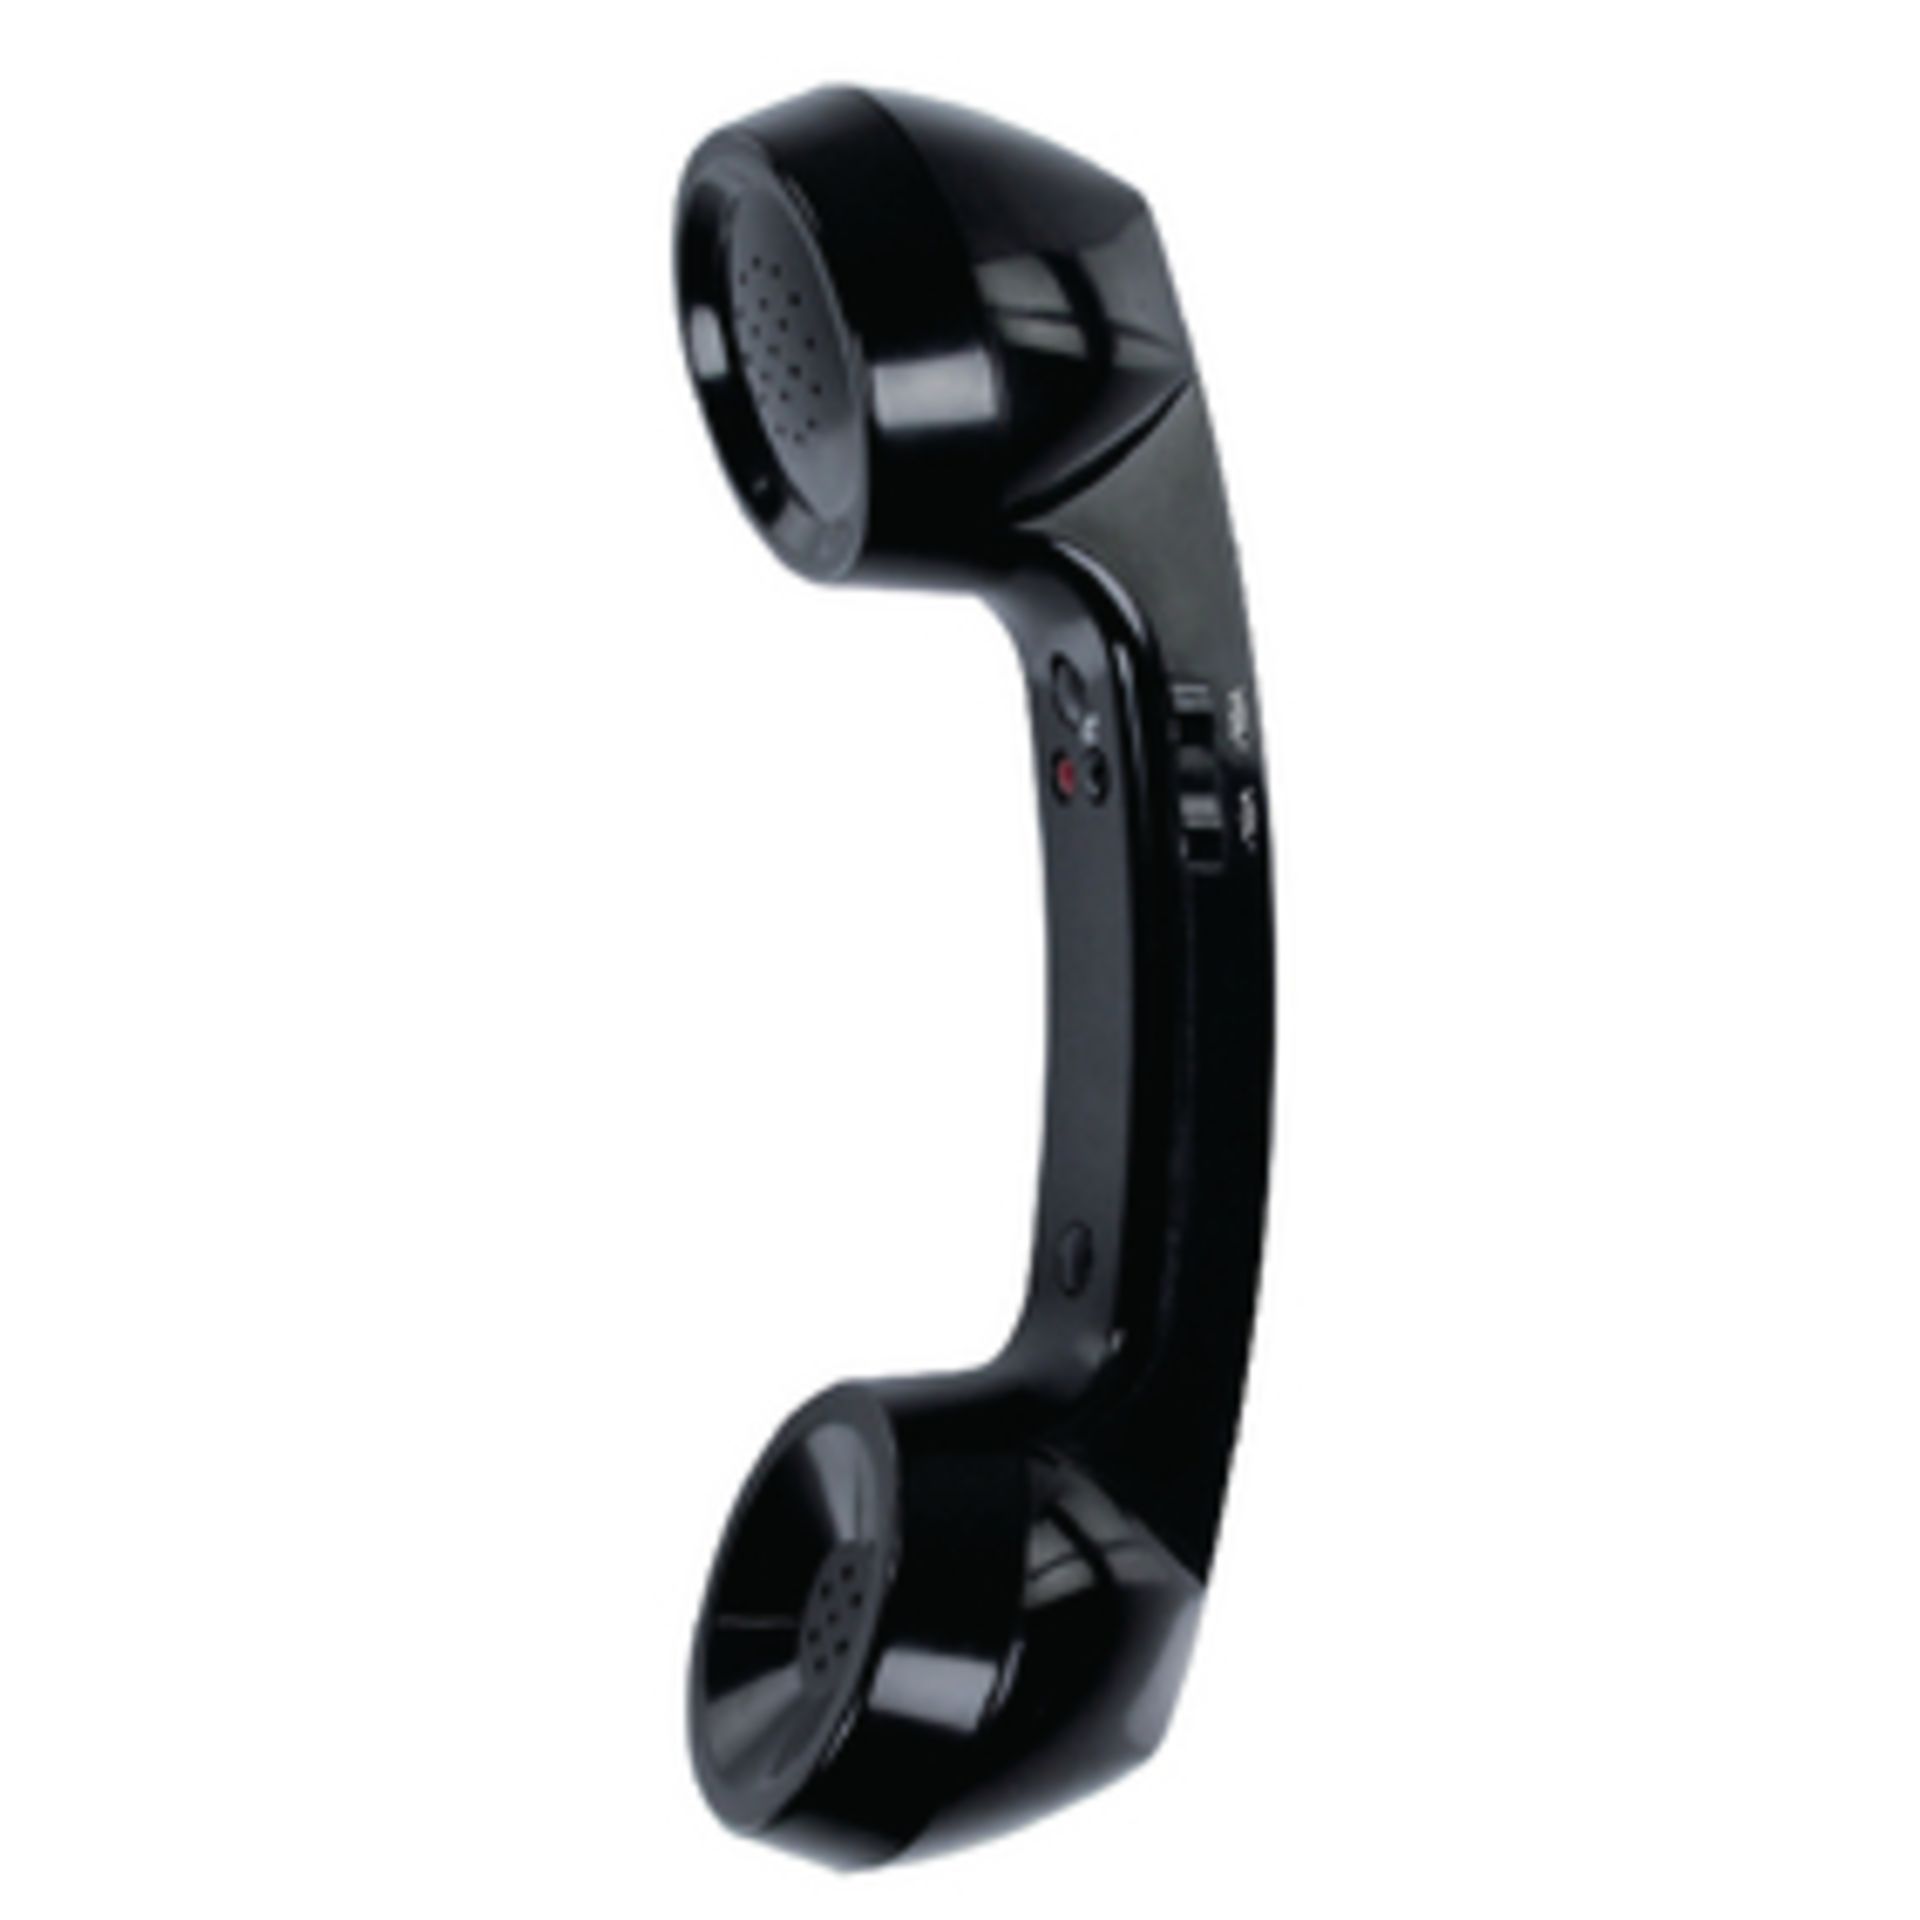 + VAT Brand New 10 X Bluetooth Retro Telephone Handset with Charging Cable - Simply Connects To